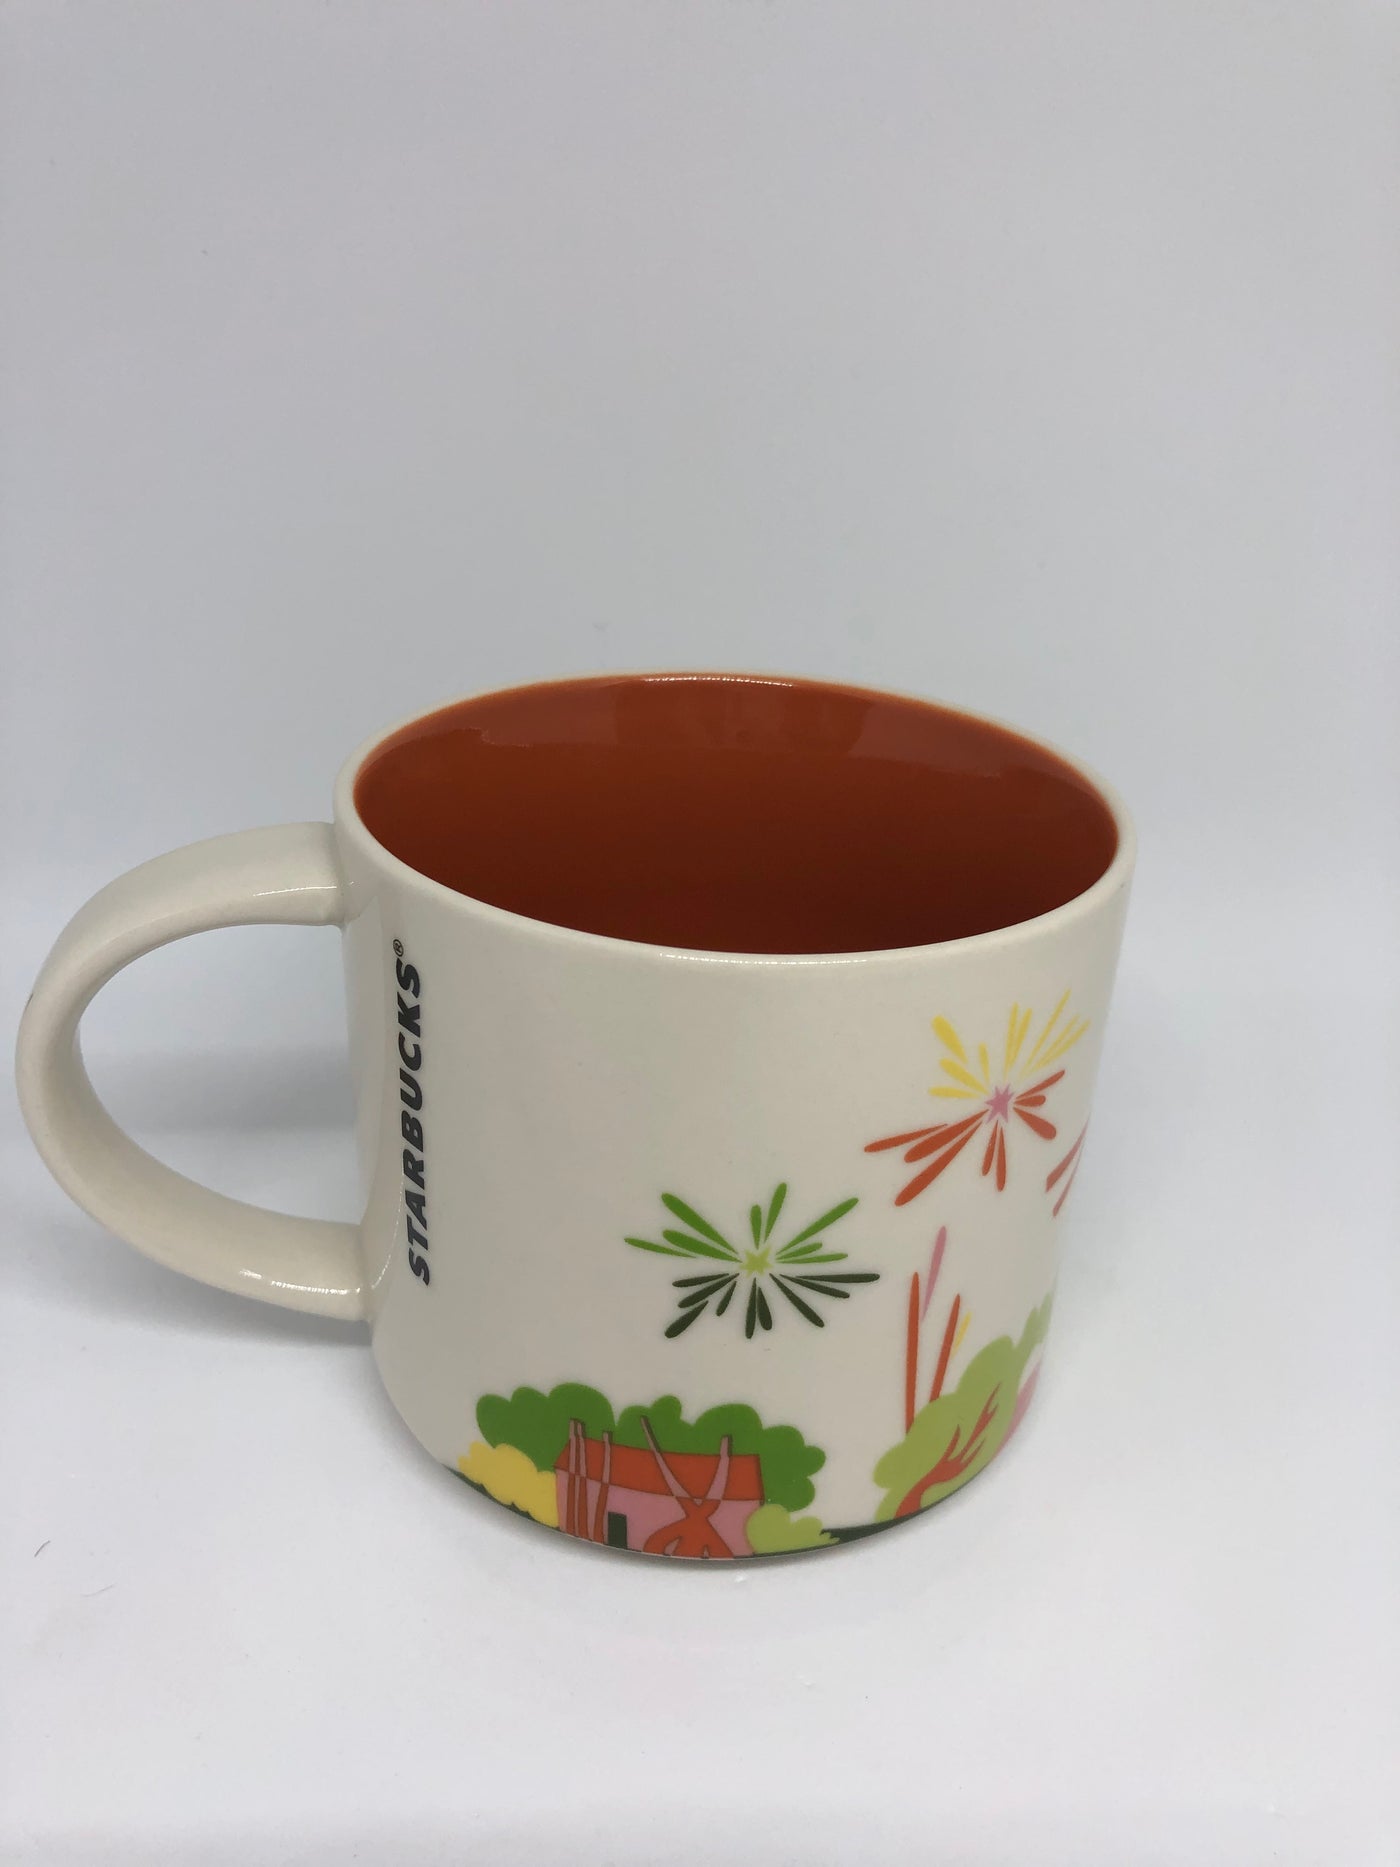 Starbucks You Are Here Collection Tainan Ceramic Coffee Mug New with Box